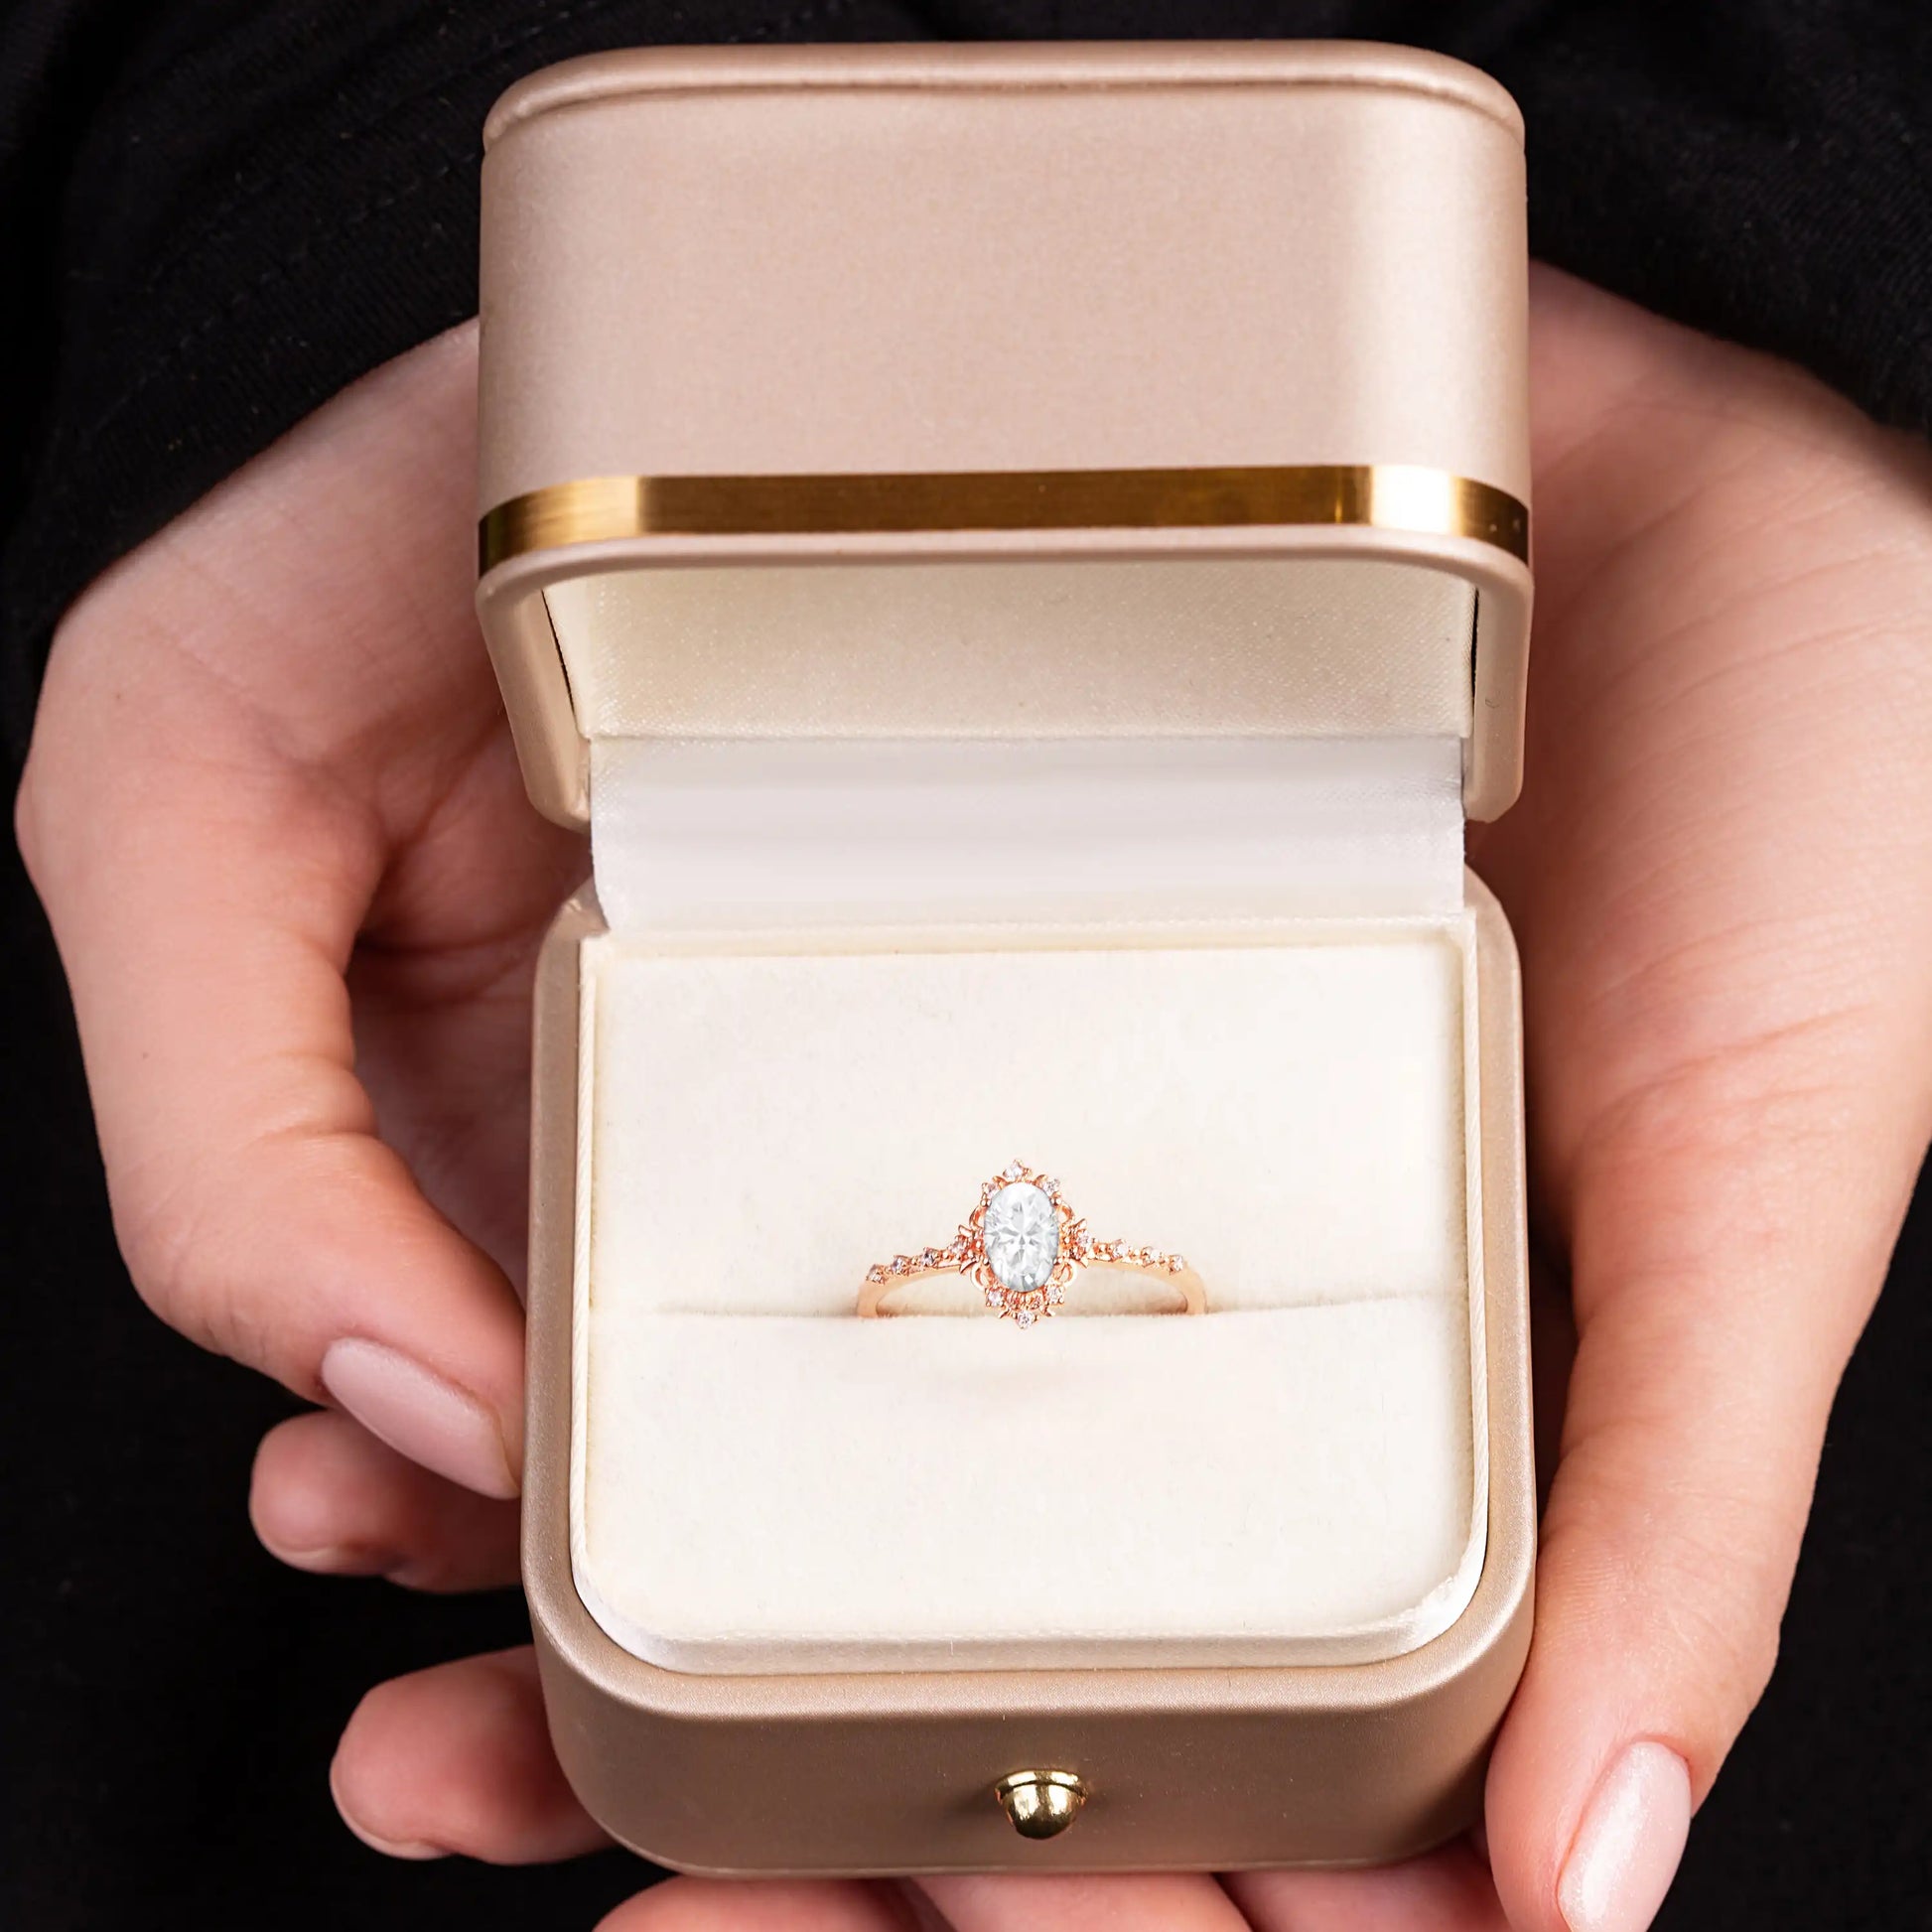 Vintage Moissanite ring set in a gold box